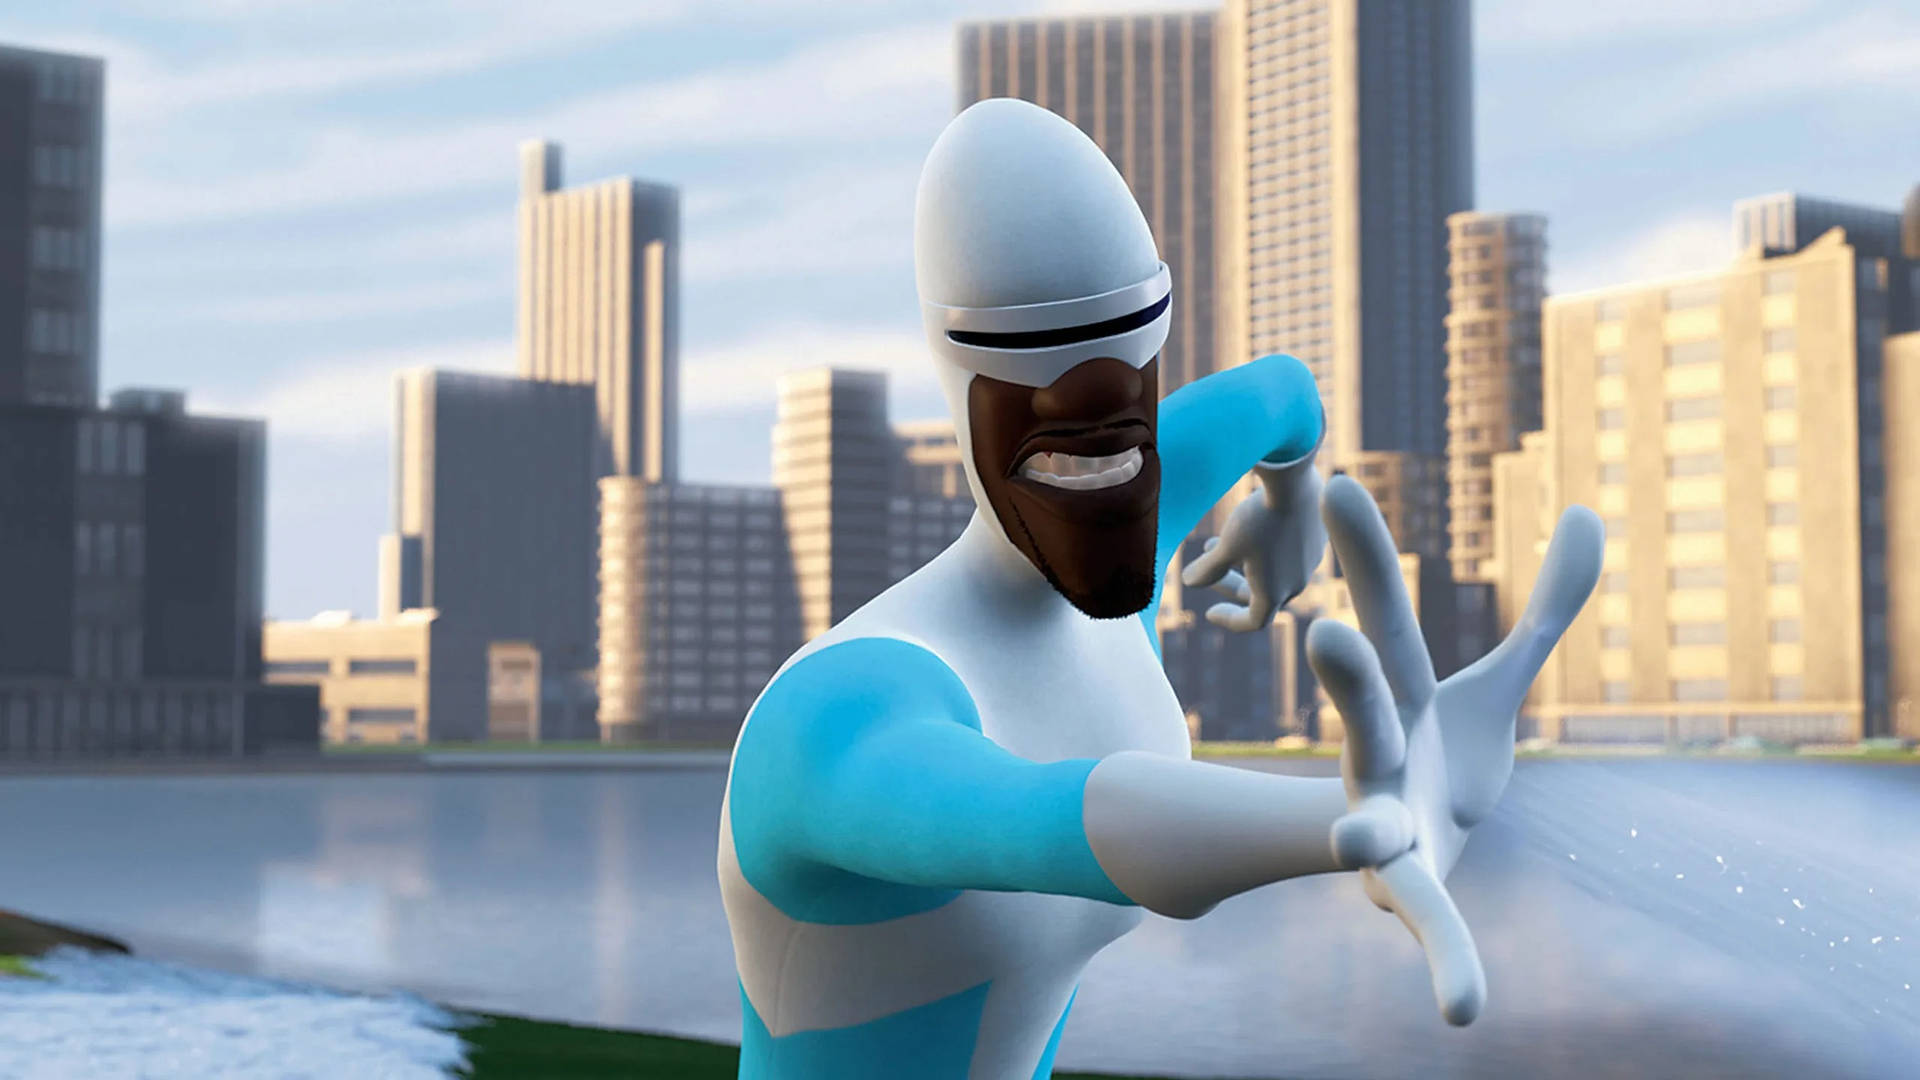 Heroic Frozone In The City wallpaper